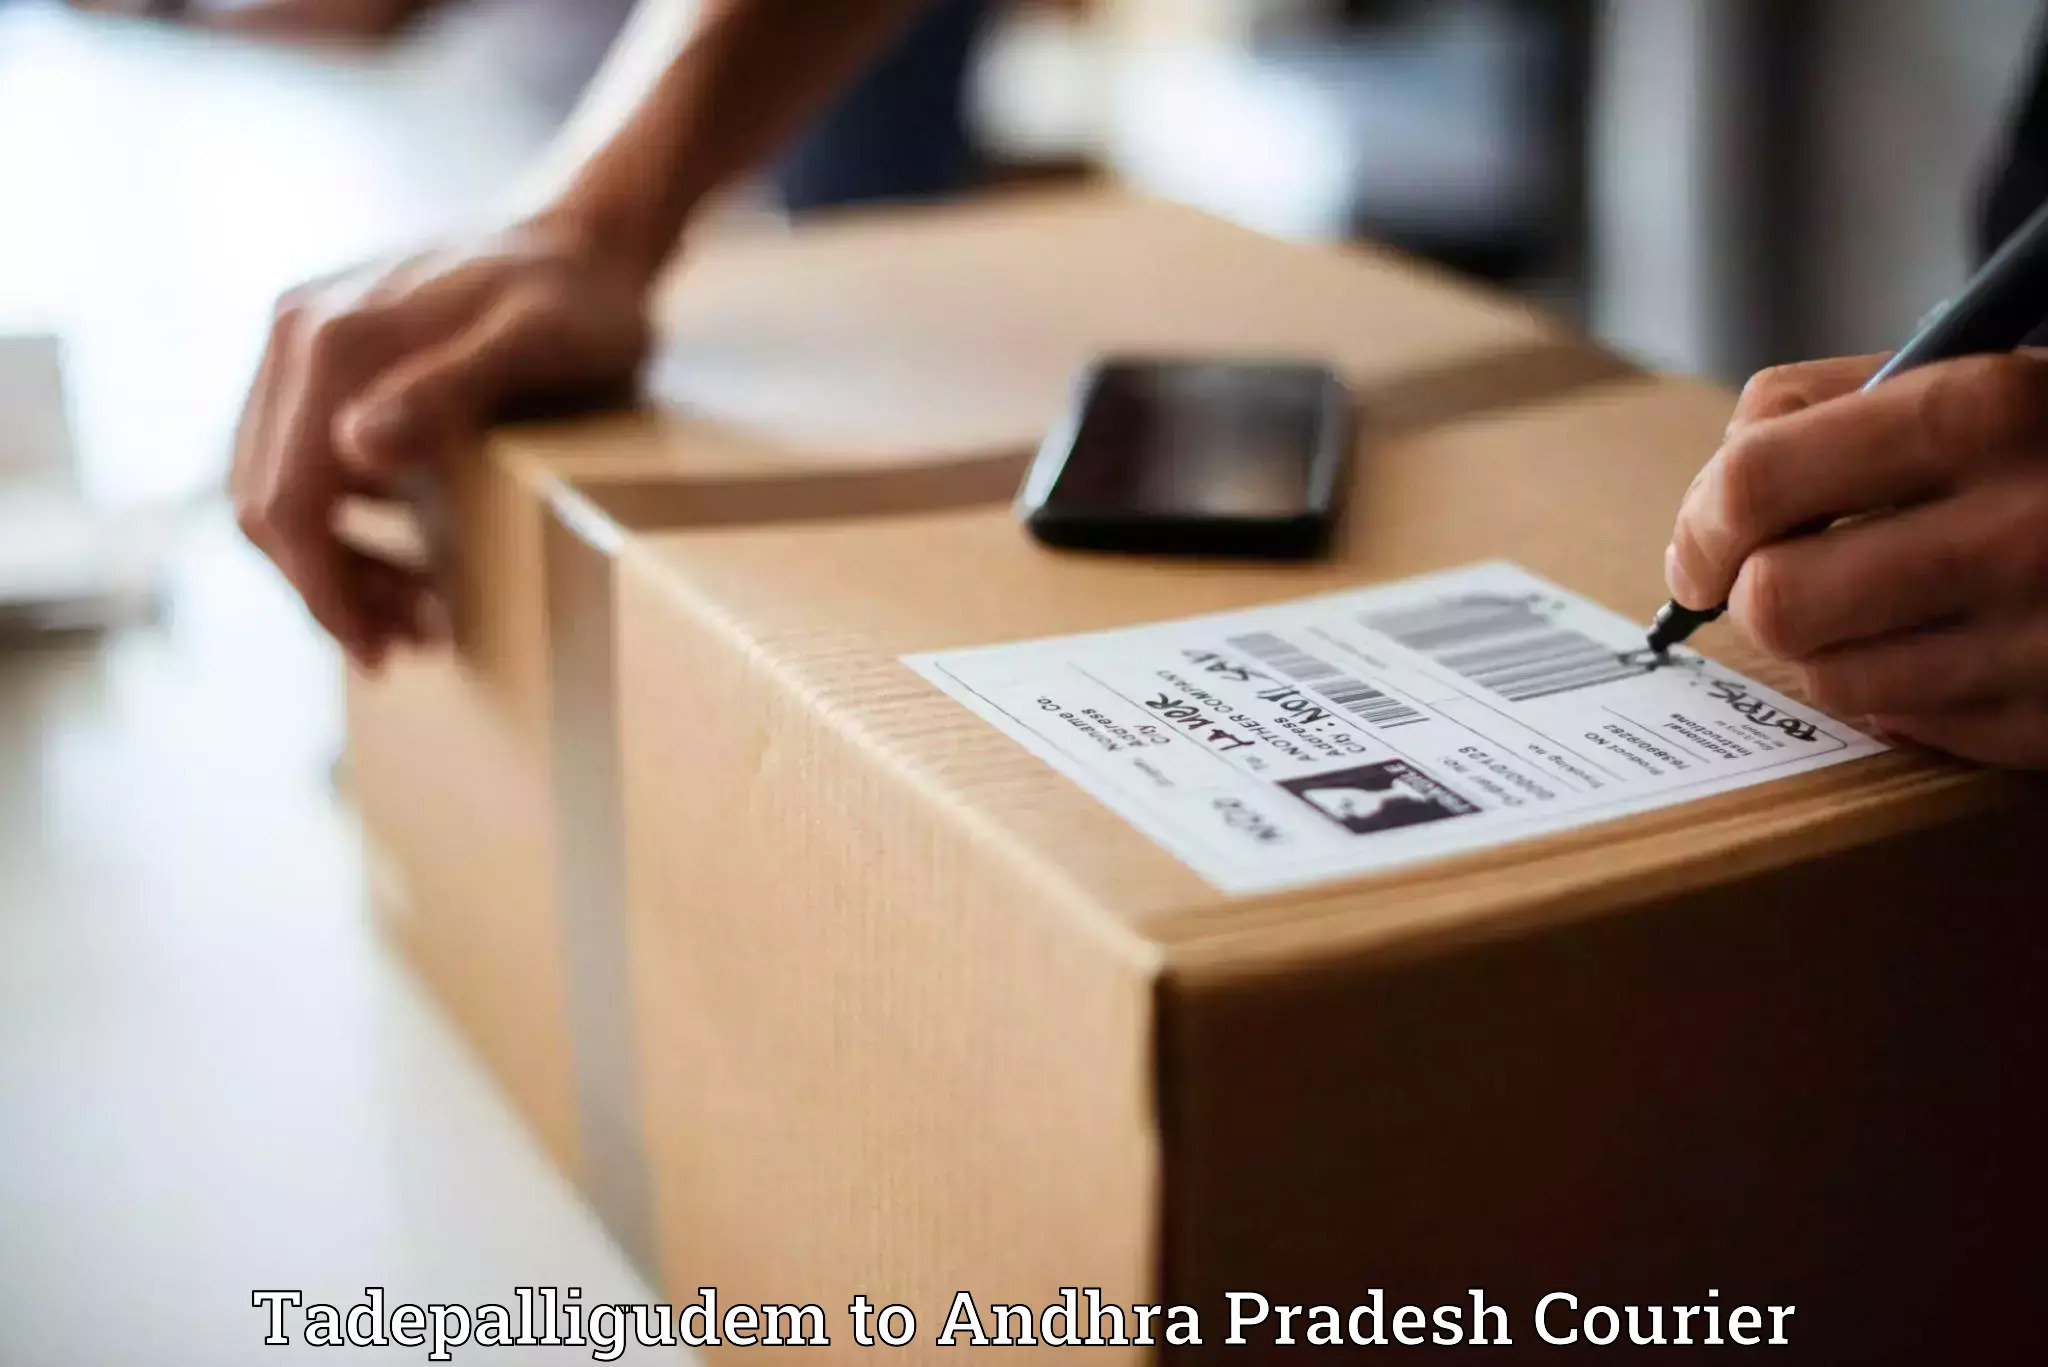 State-of-the-art courier technology Tadepalligudem to Kondapi